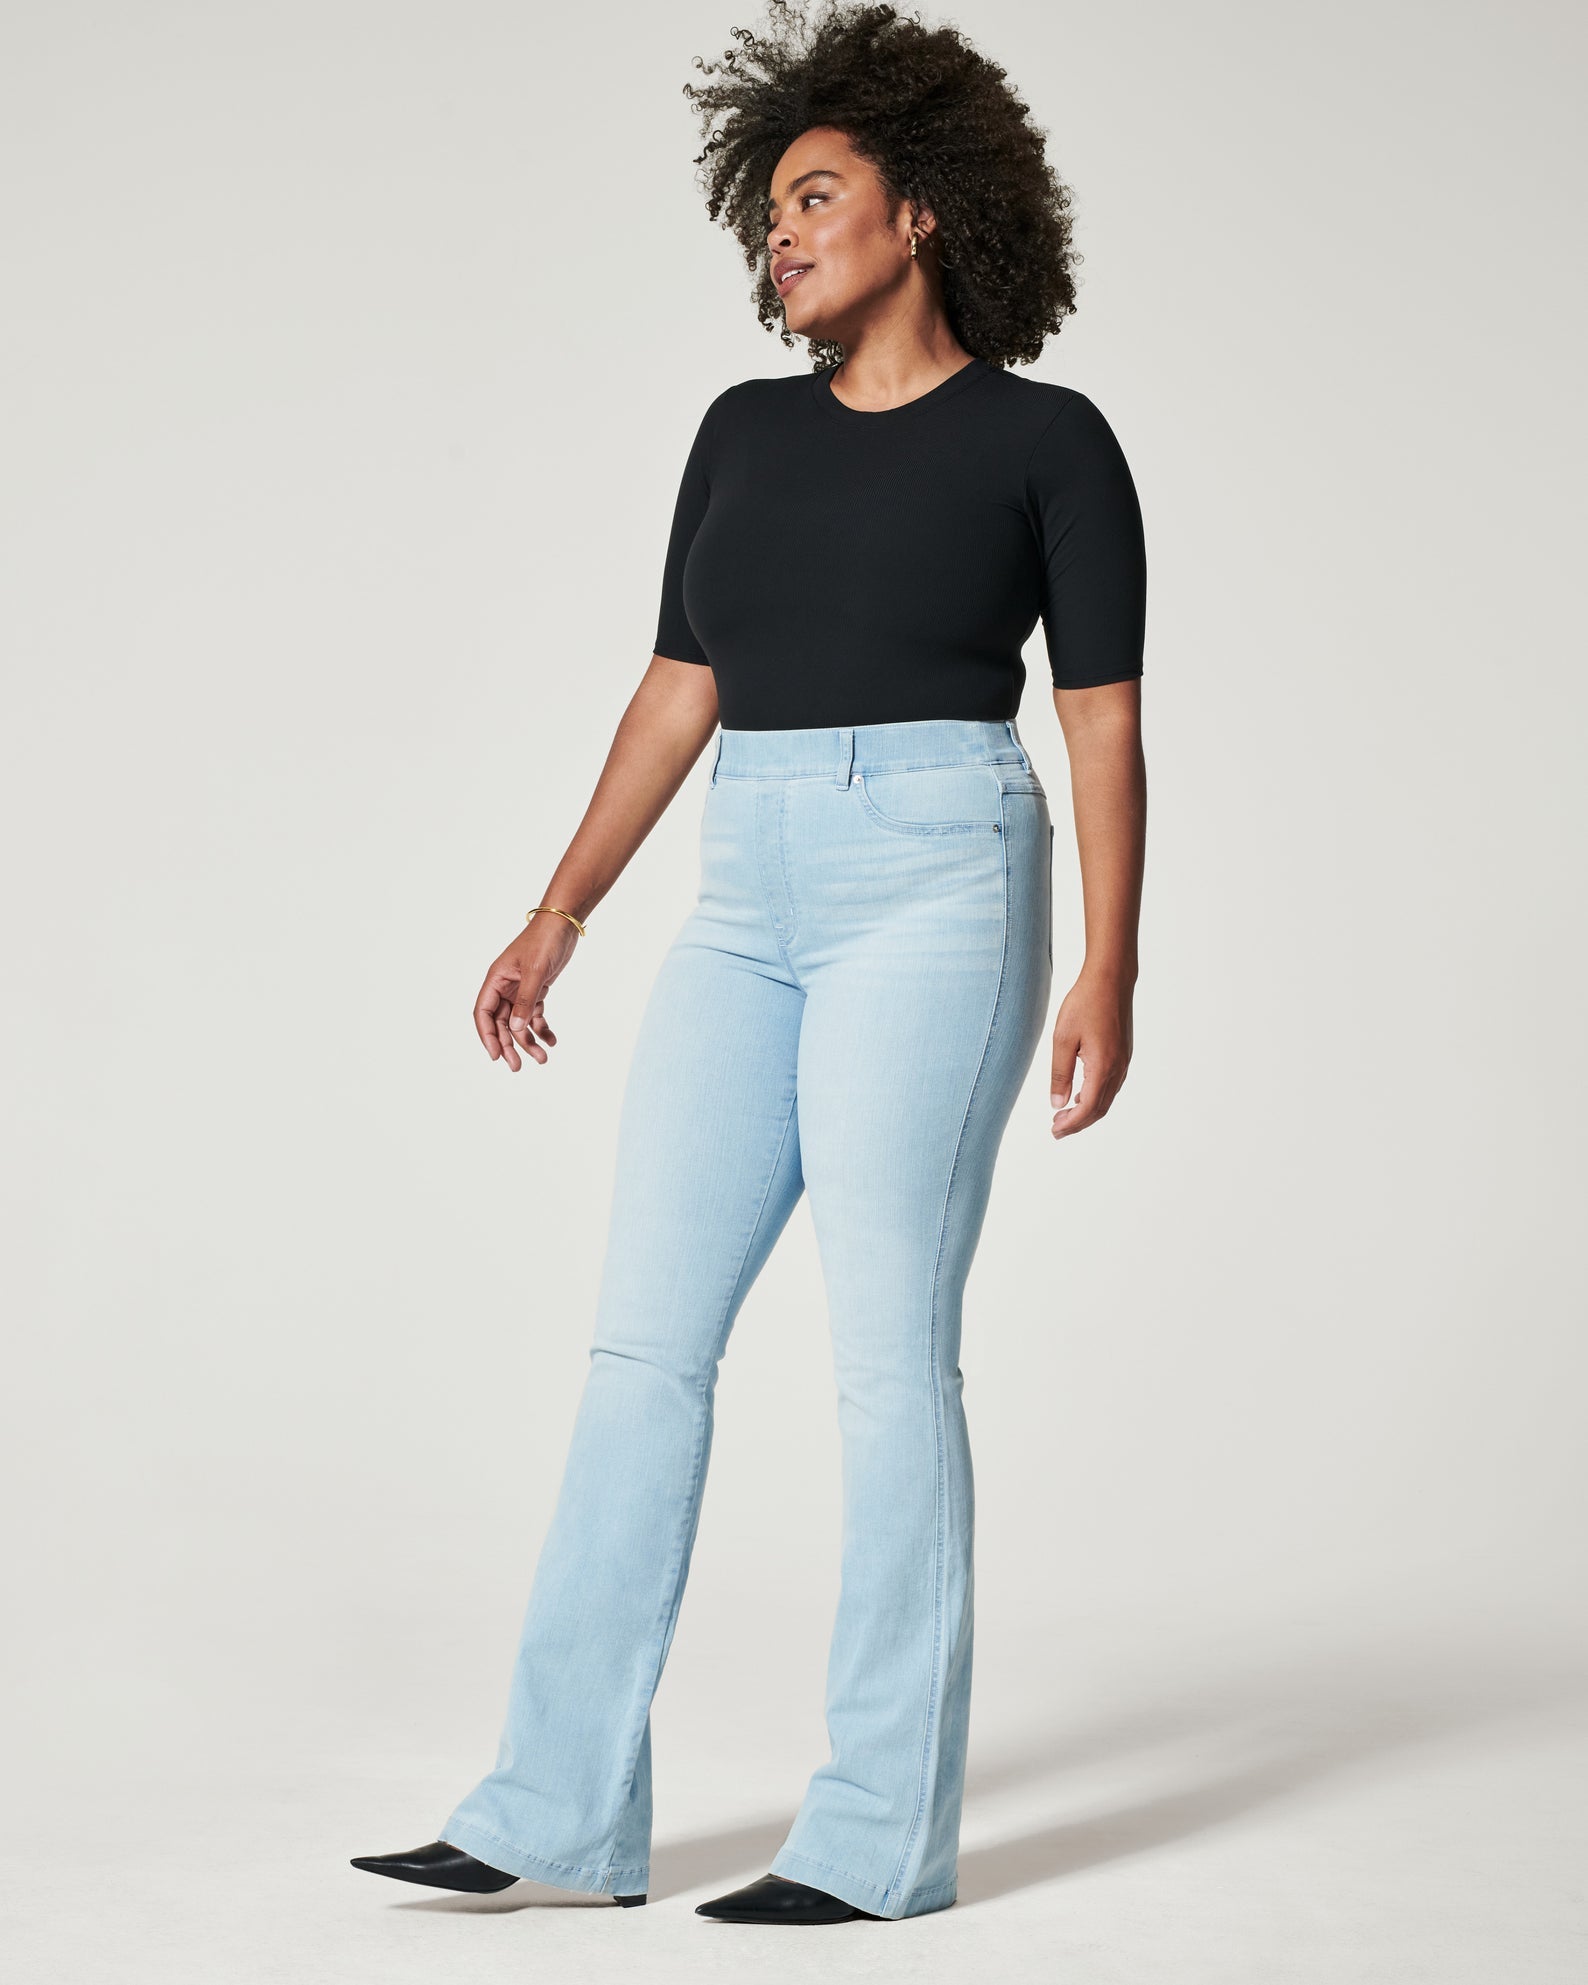  Spanx Jeans For Women Petite